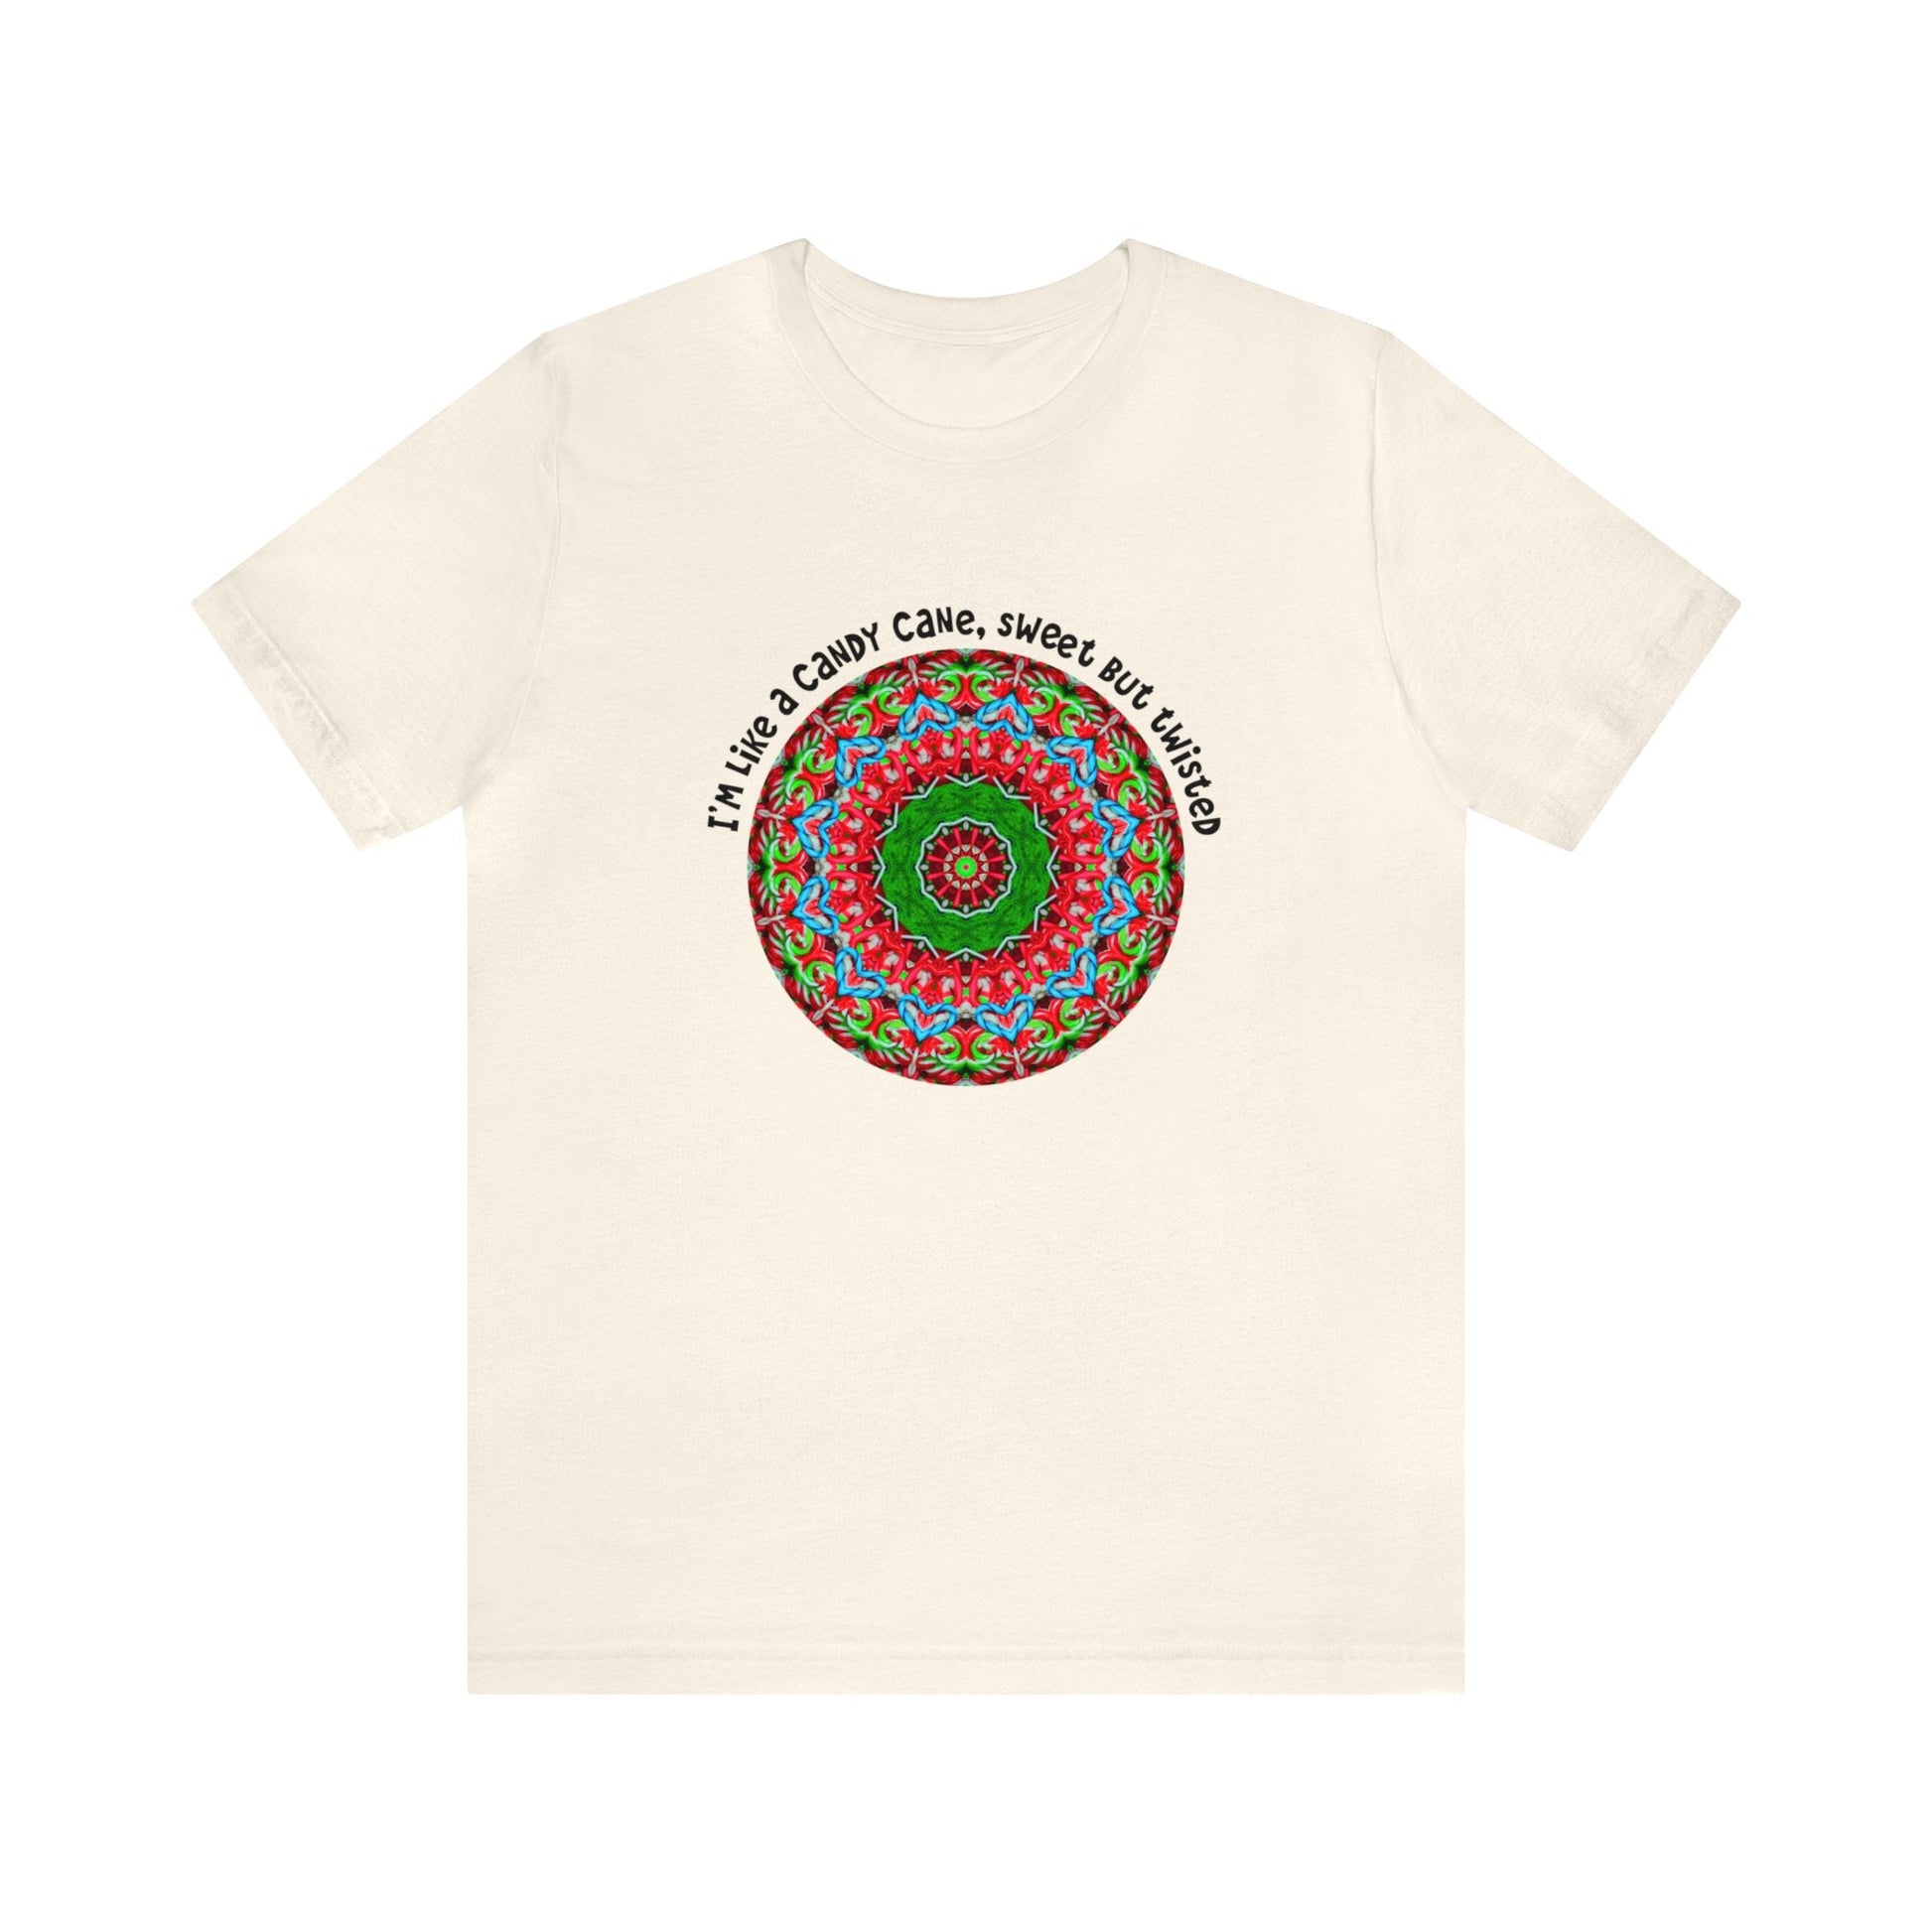 Sarcastic Funny Christmas Shirt - All Day Graphic TShirts, Im like a candy cane cute but twisted Candy Cane Mandala Natural